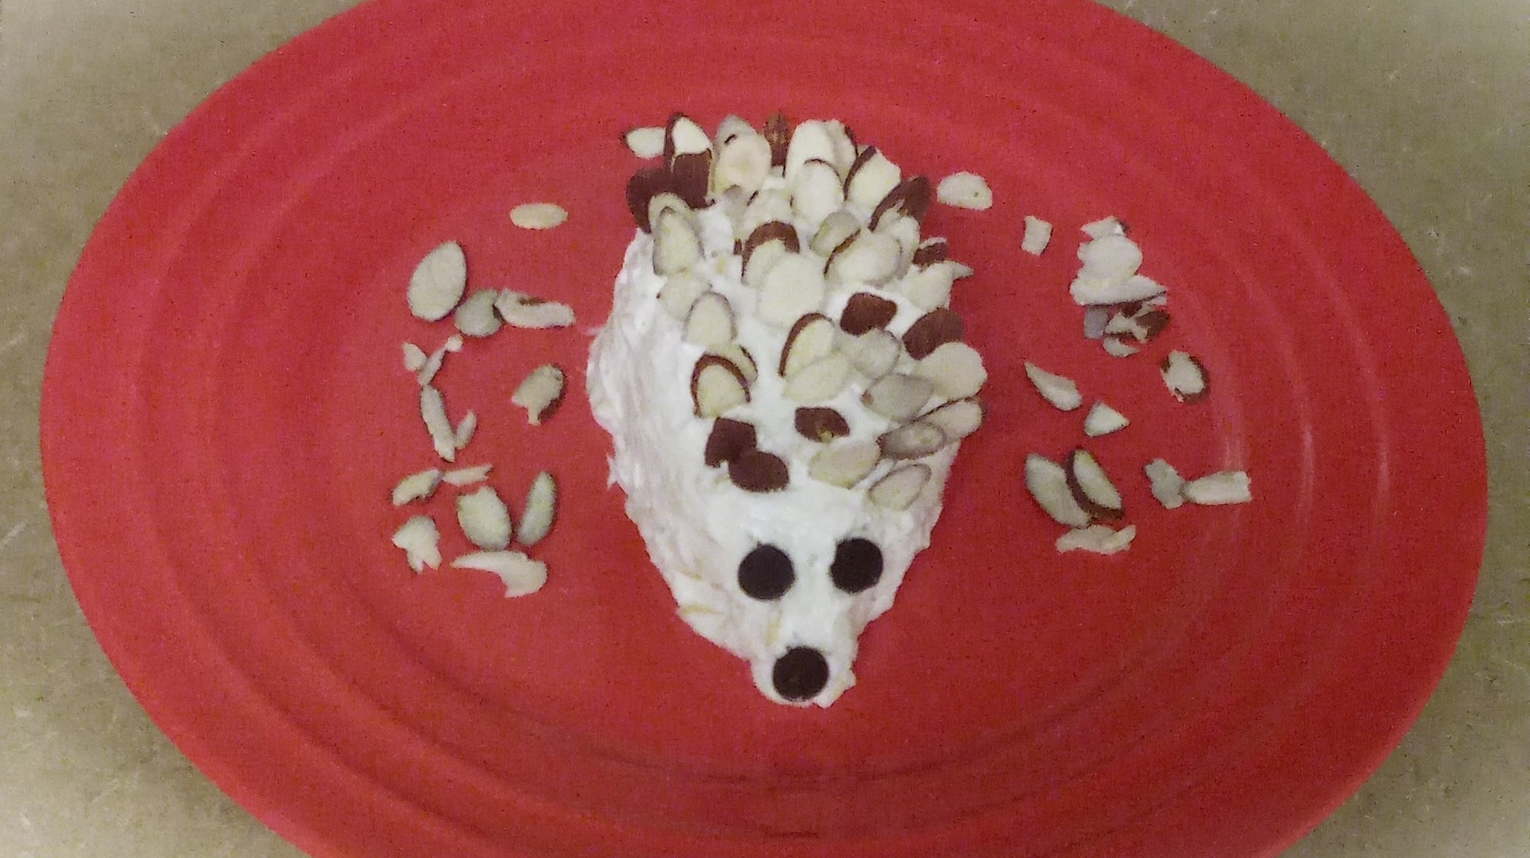 Hedgehog cheese ball on a red plate with slices of almonds laying around the cheese ball. Hedgehog Cheese ball